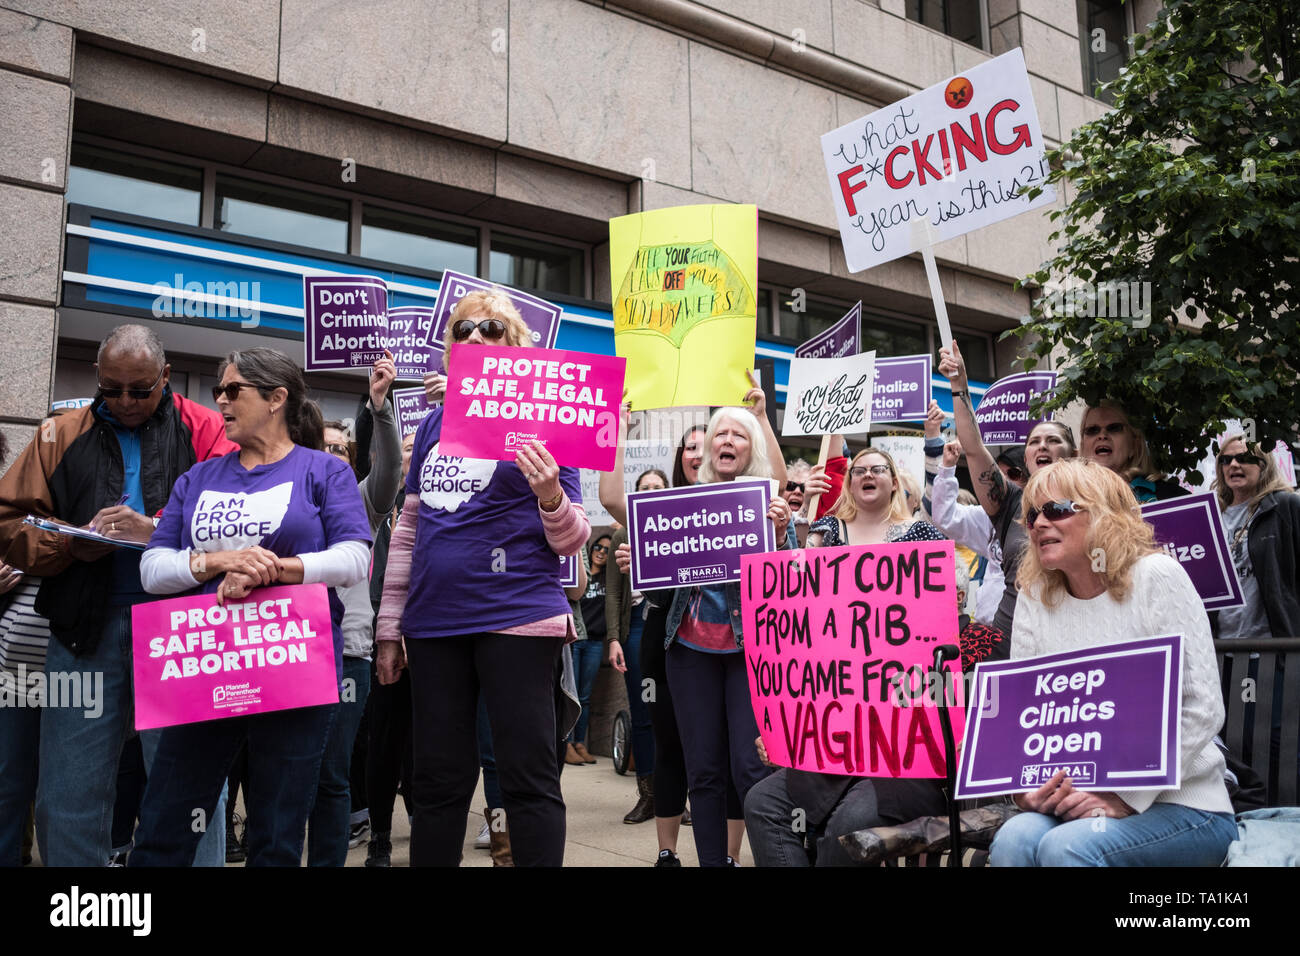 Activists are seen holding placards during the protest. Abortion rights activists took part in stop the bans rally nationwide after multiple states pass fetal heartbeat bills. Stock Photo